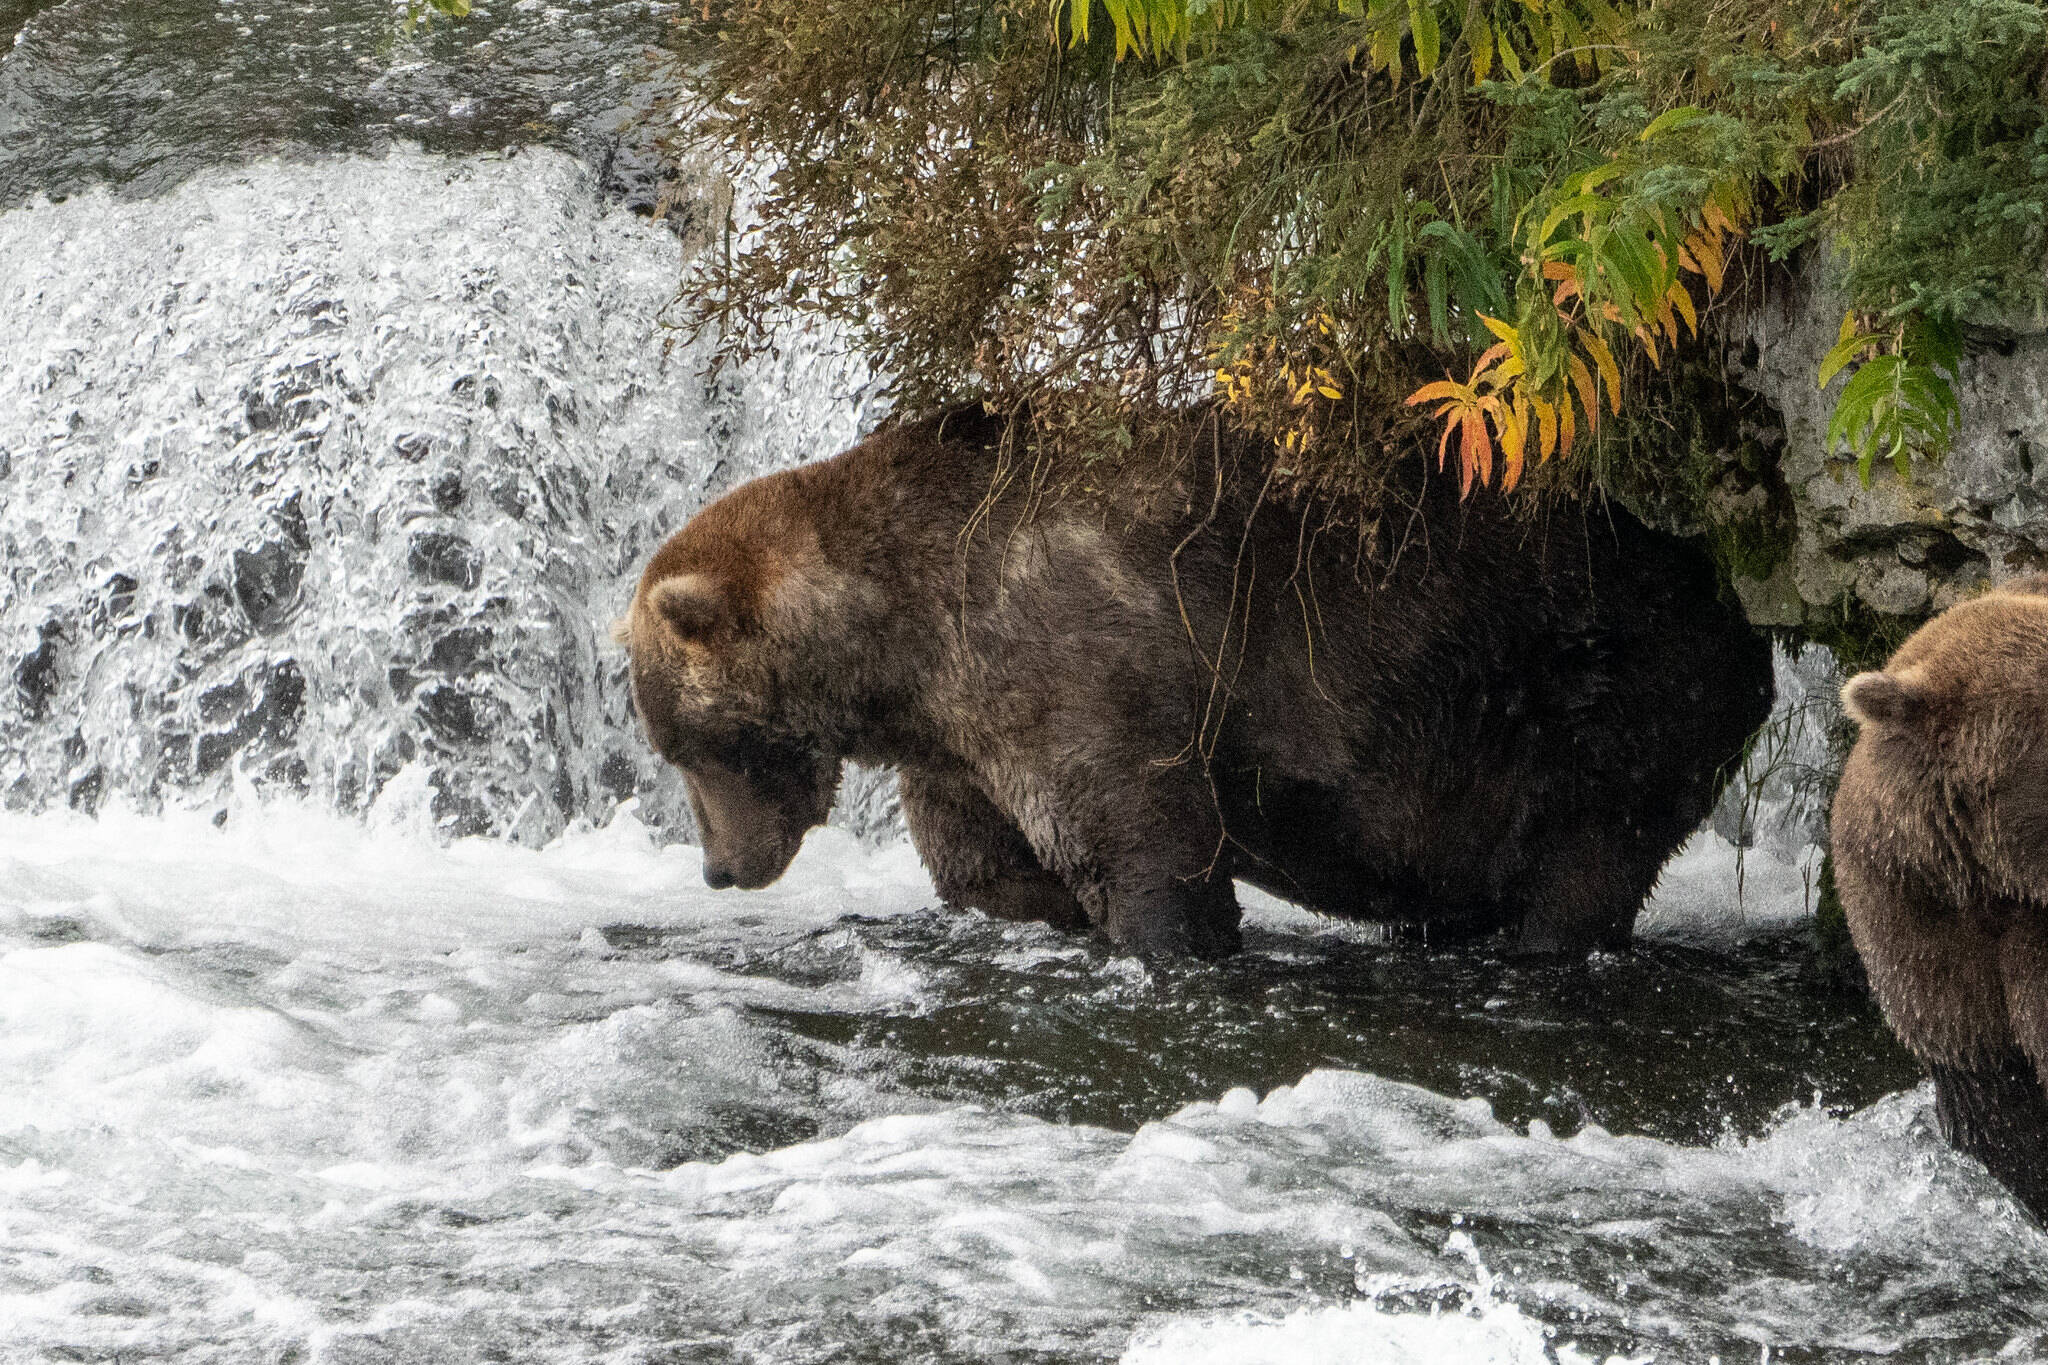 Photo courtesy of Lian Law, National Parks Service 
Otis, the four-time Fat Bear Week champion, fishes at Katmai National Park on Sept. 16, 2021.